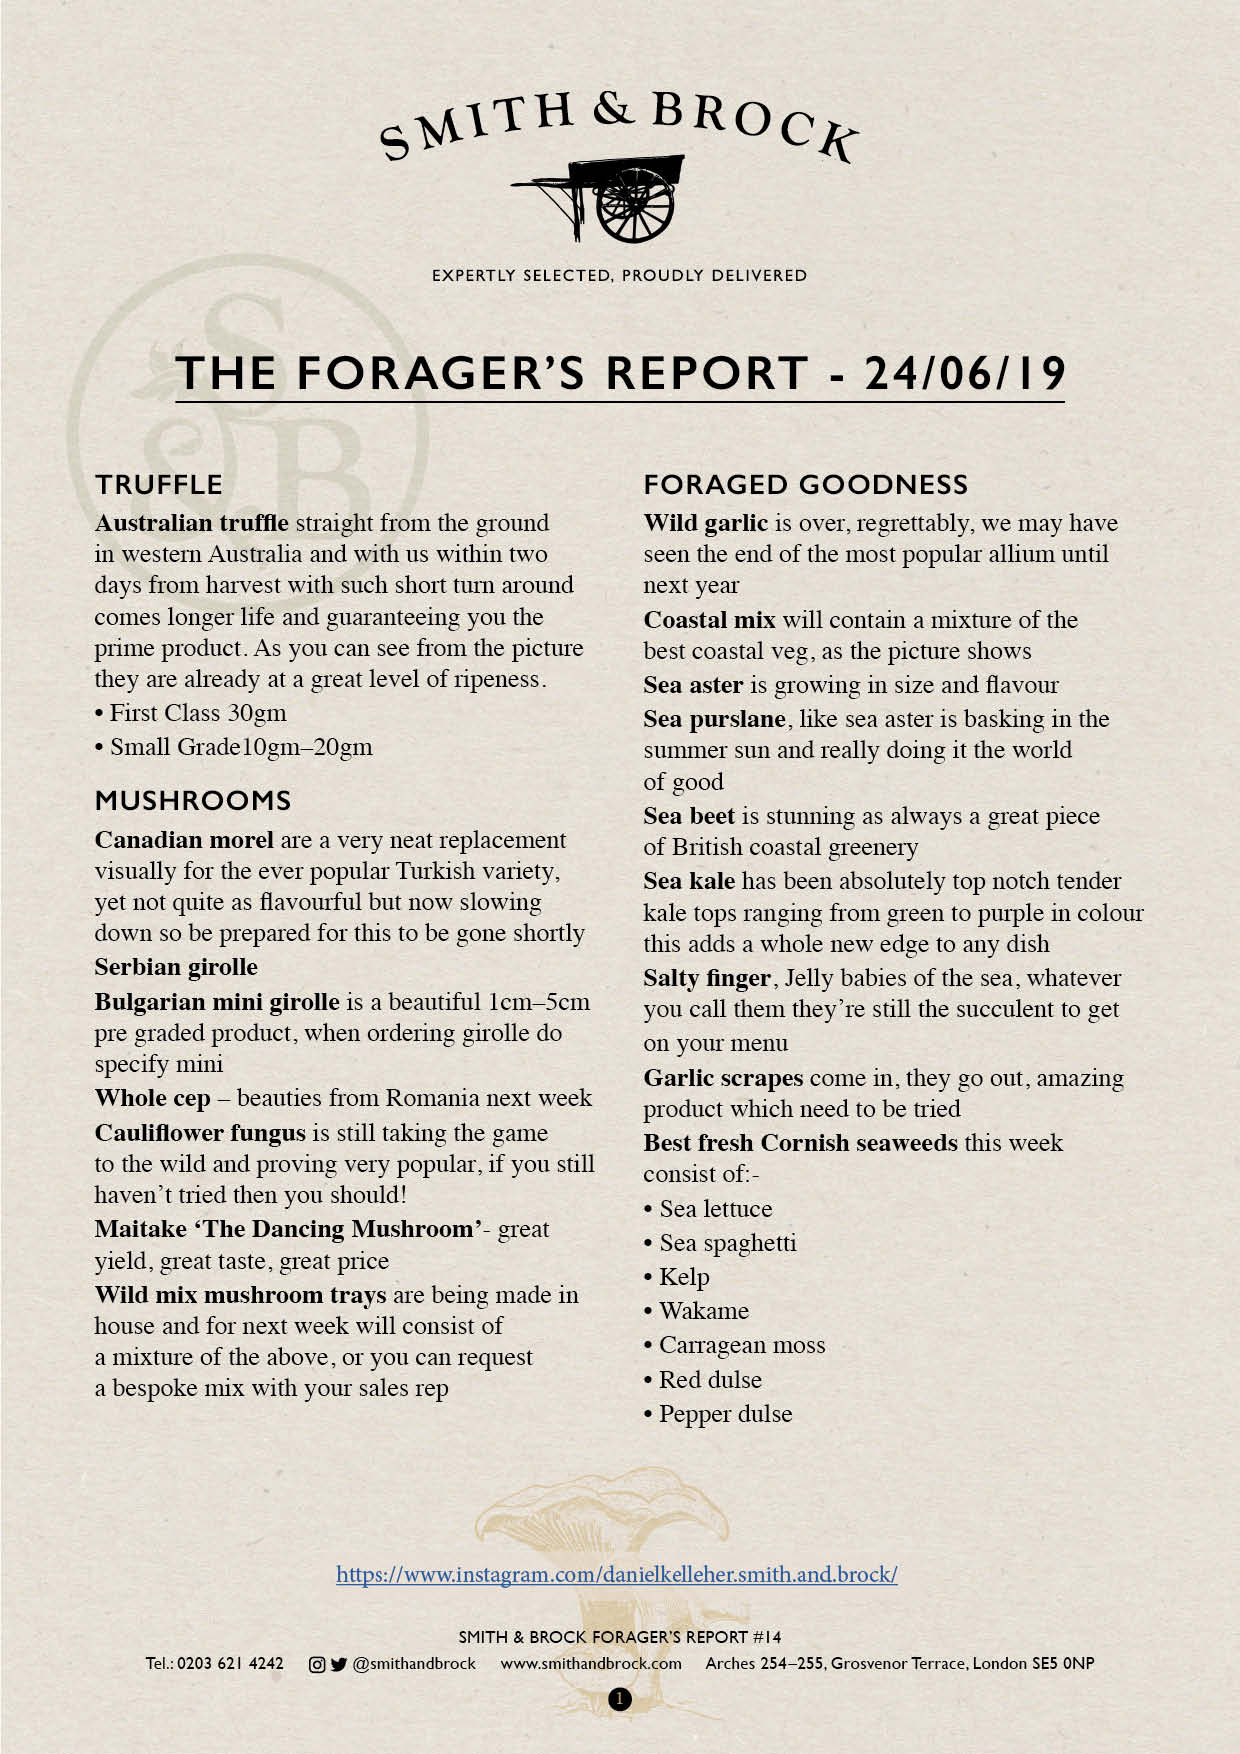 Smith&Brock Foraged Products Report 24 June 2019 14